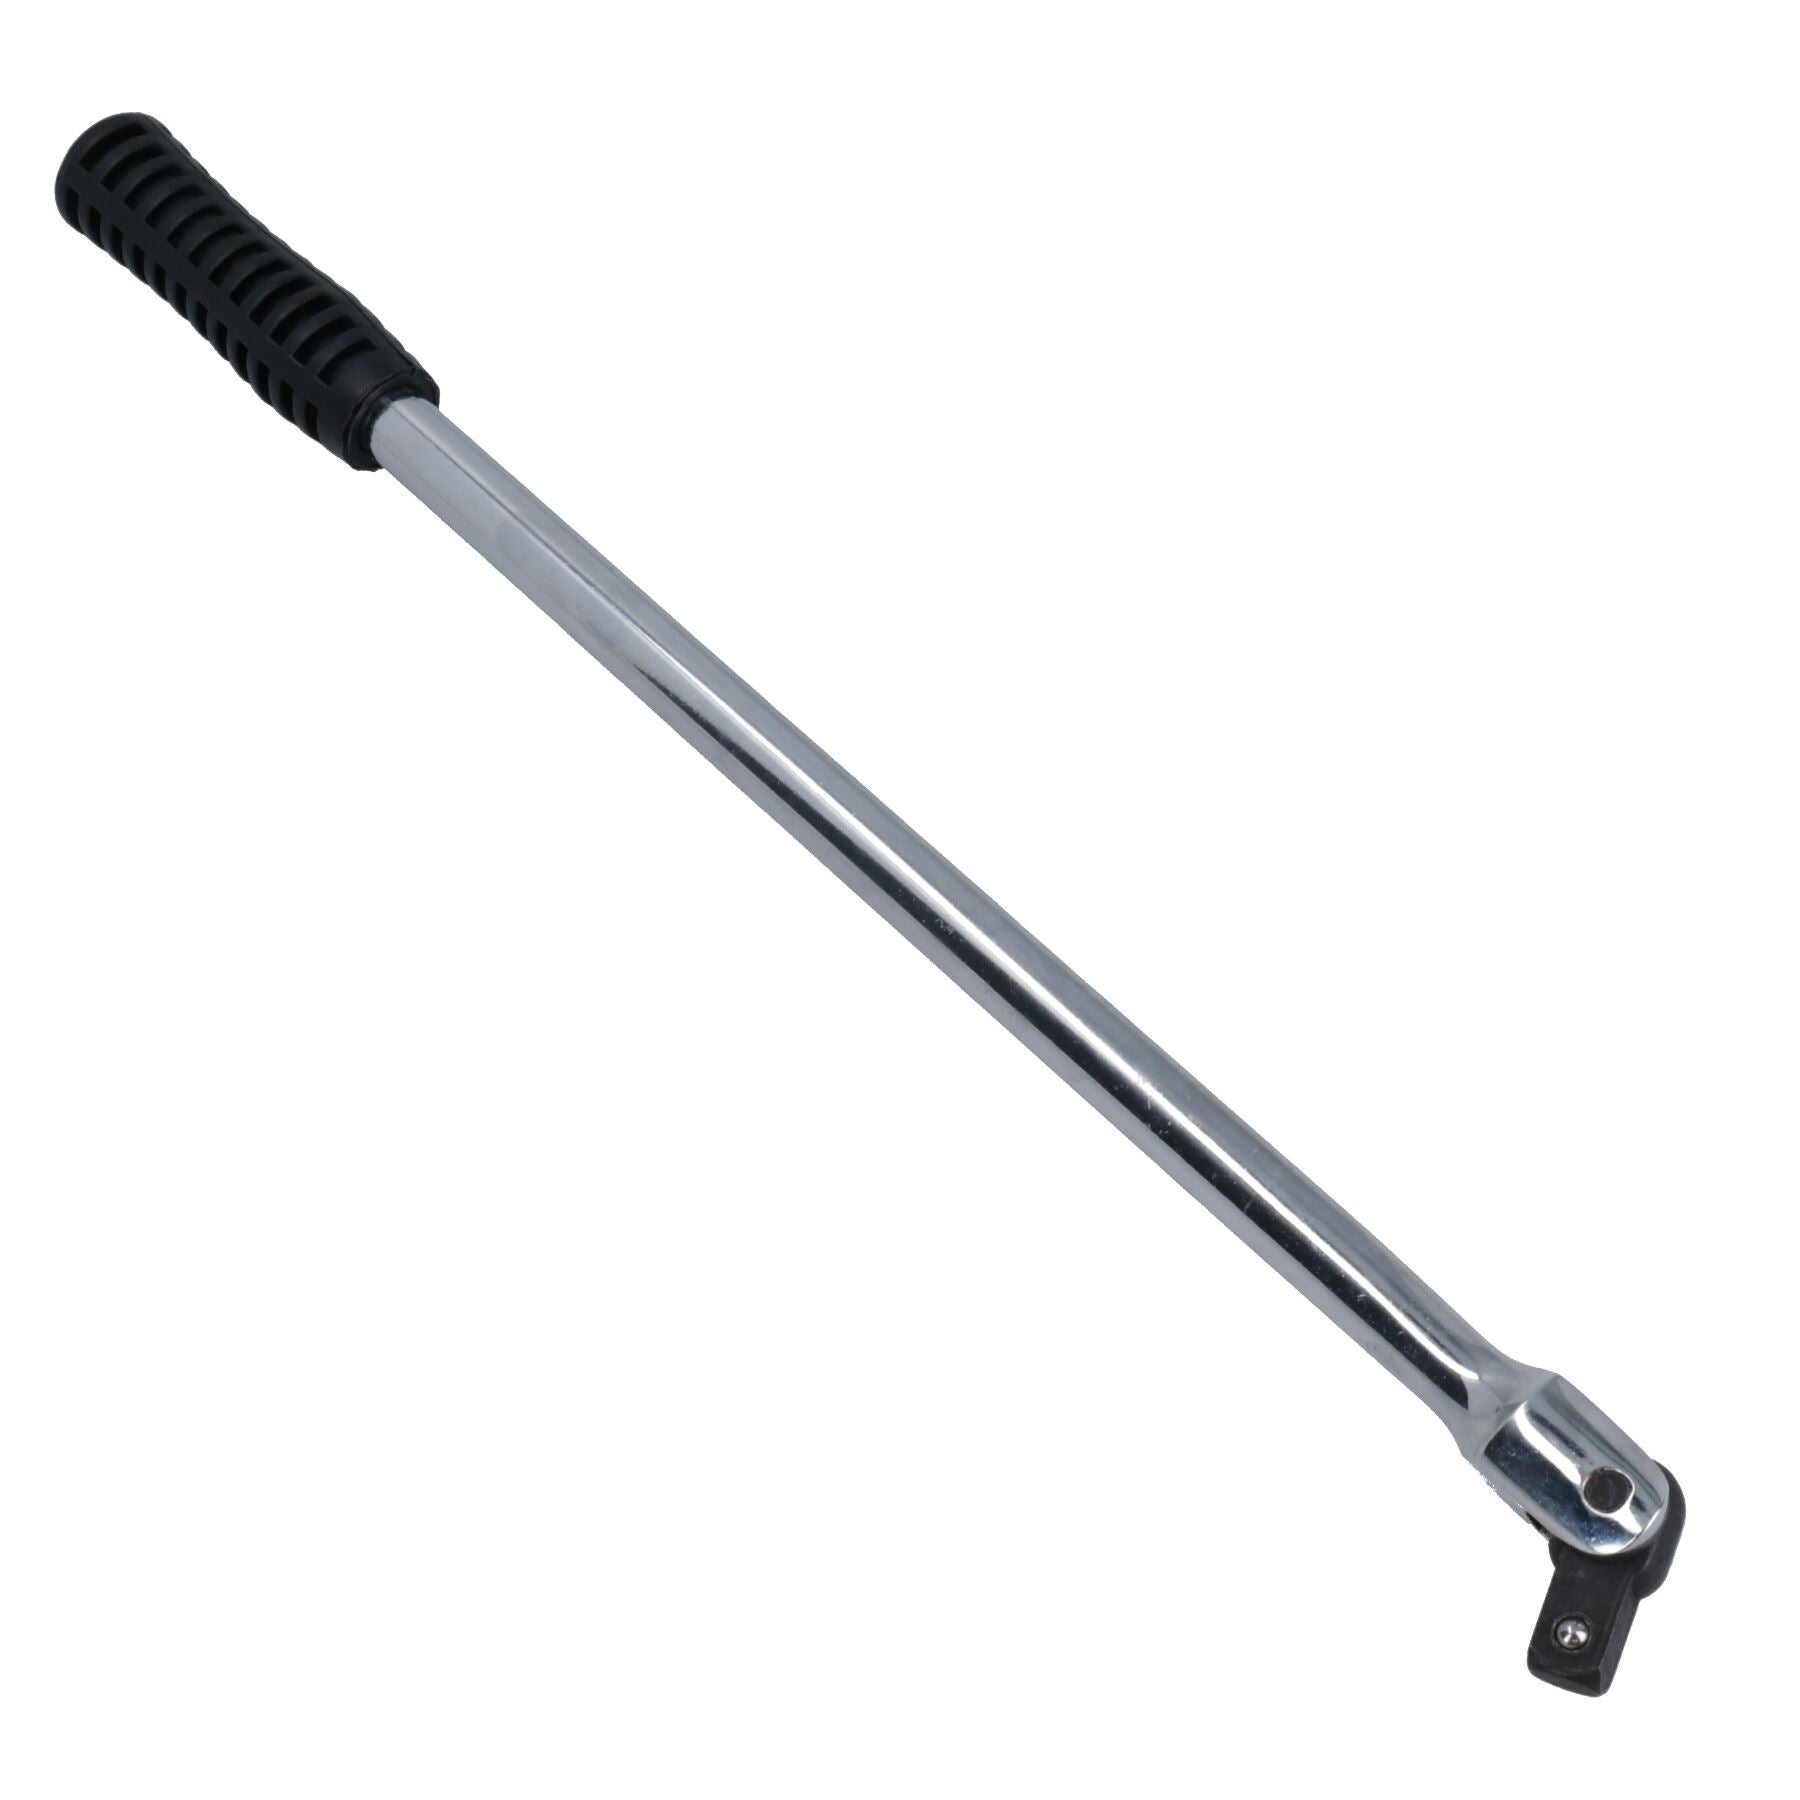 1/2" Drive Breaker / Power Bar 18" / 455mm with Rubber Handle Wrench TE539